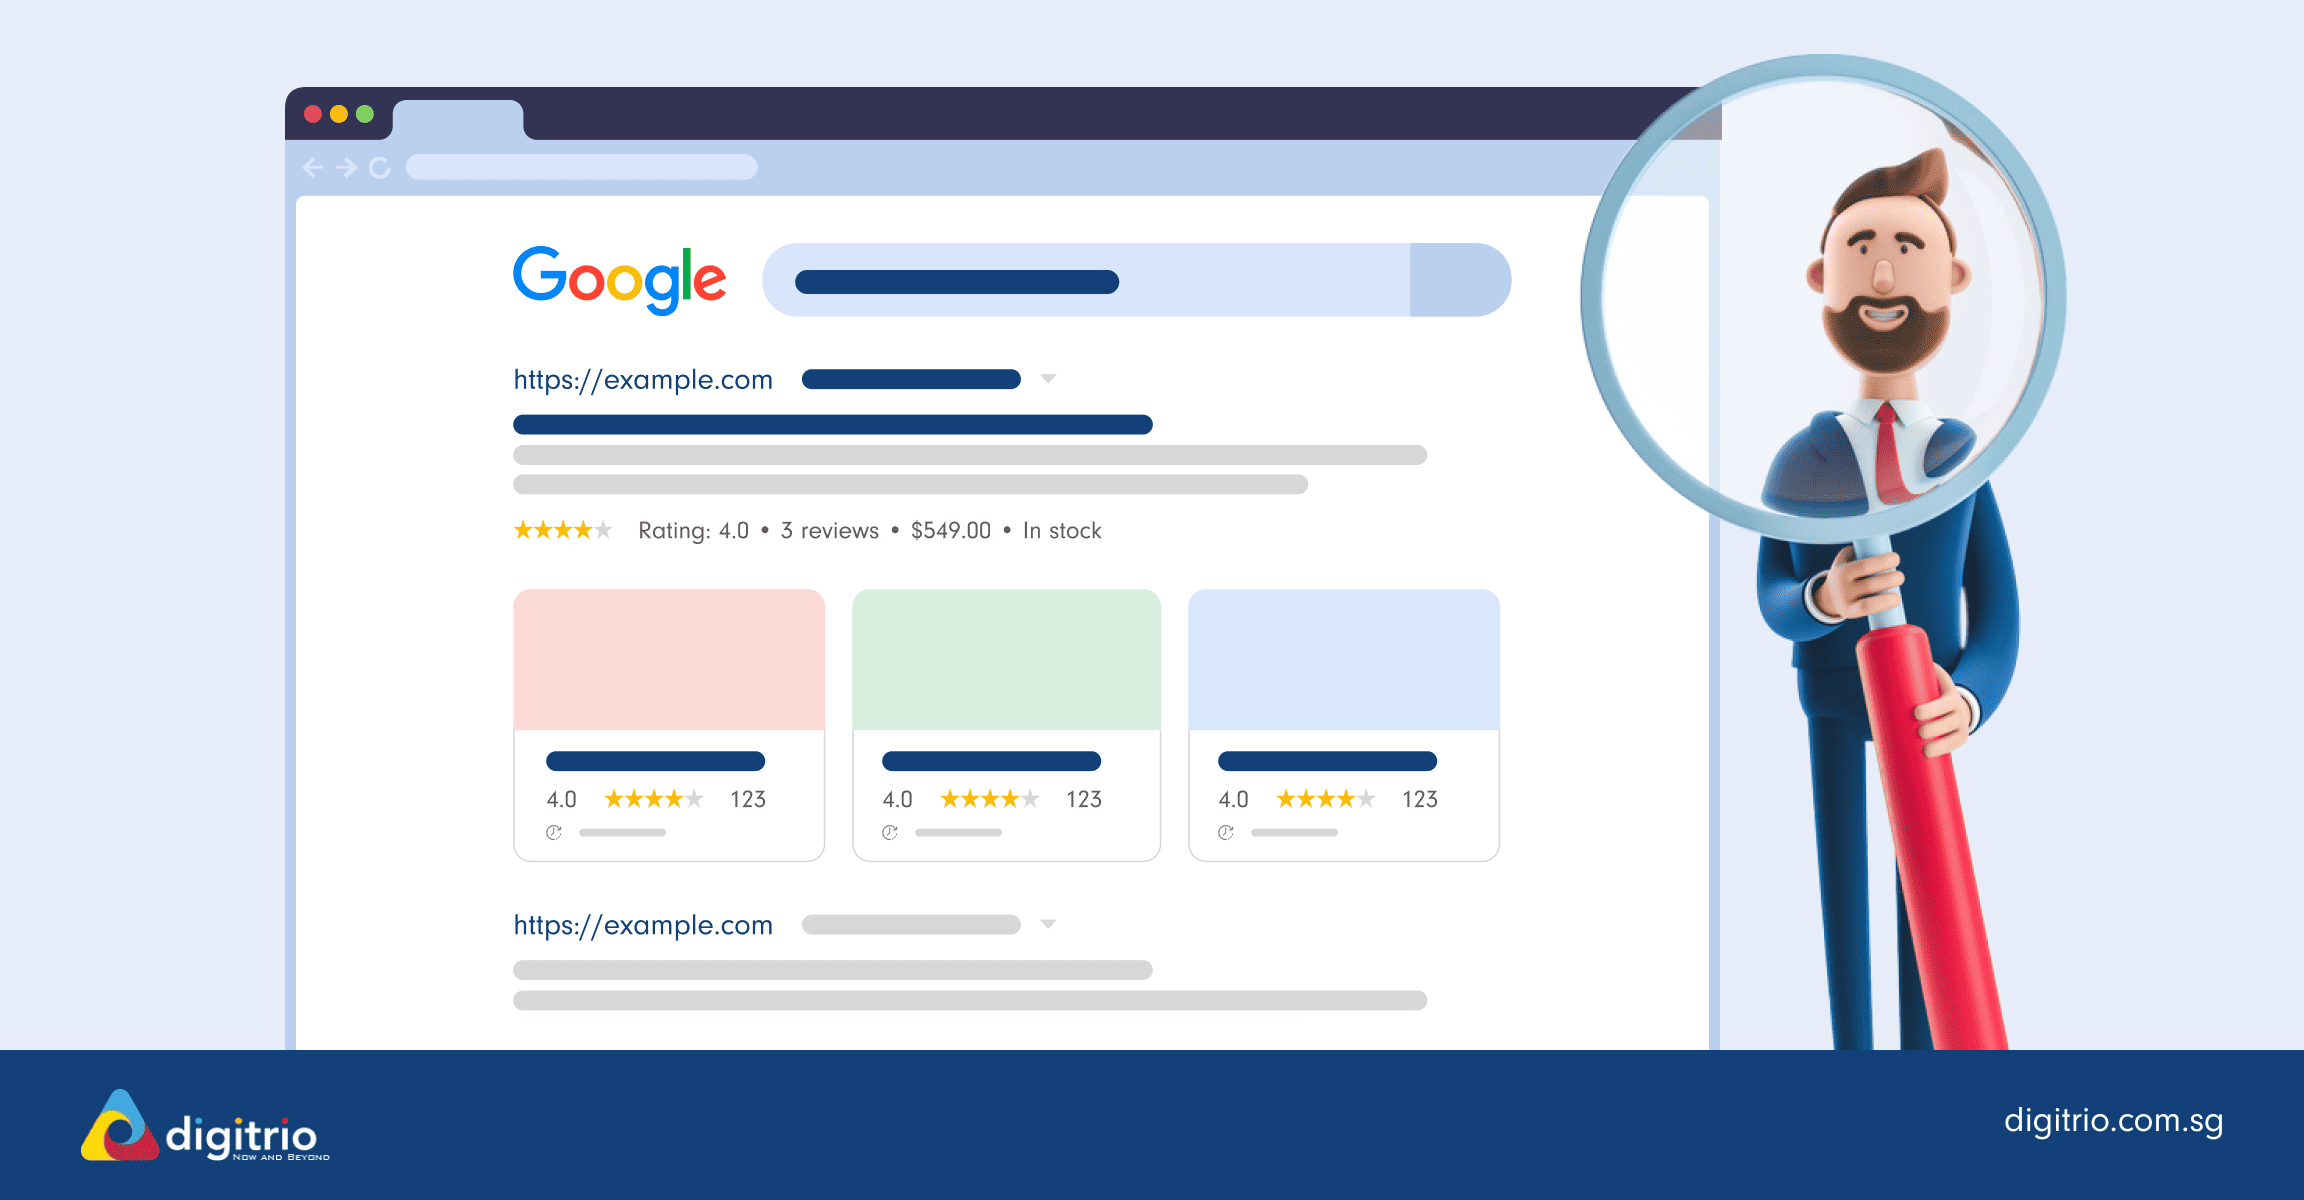 Search engine with structured data markup 